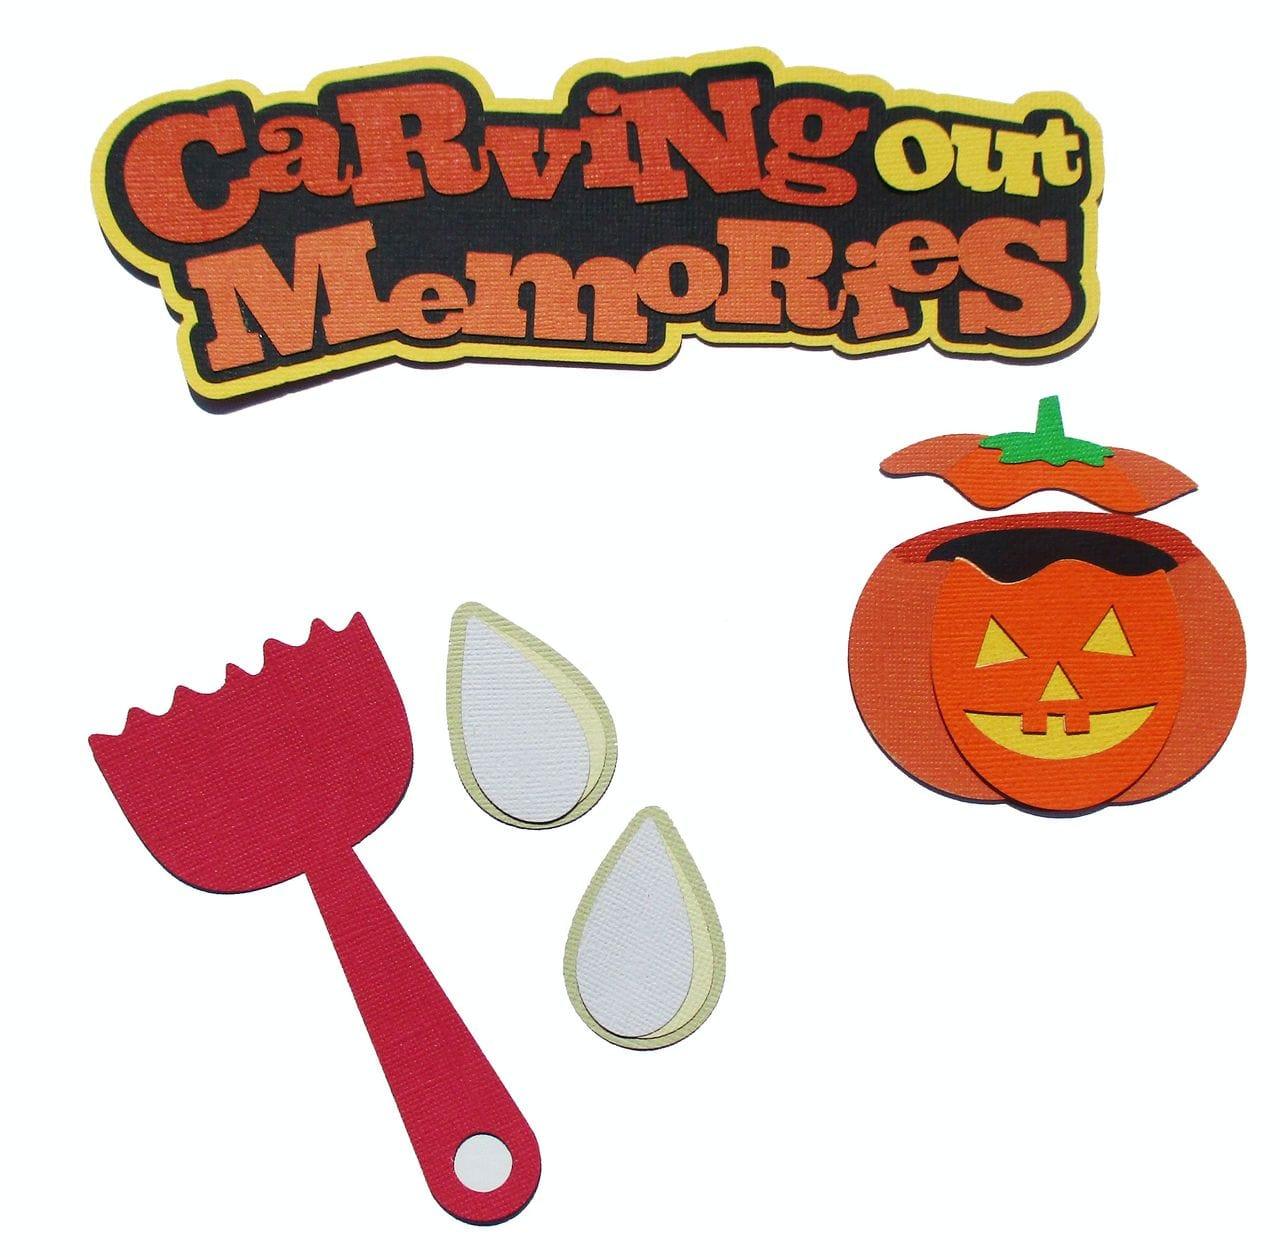 Carving Out Memories 2.5 x 8 Title, Pumpkin, Seeds, Carving Spoon 5-Piece Set Fully-Assembled Laser Cut Scrapbook Embellishment by SSC Laser Designs